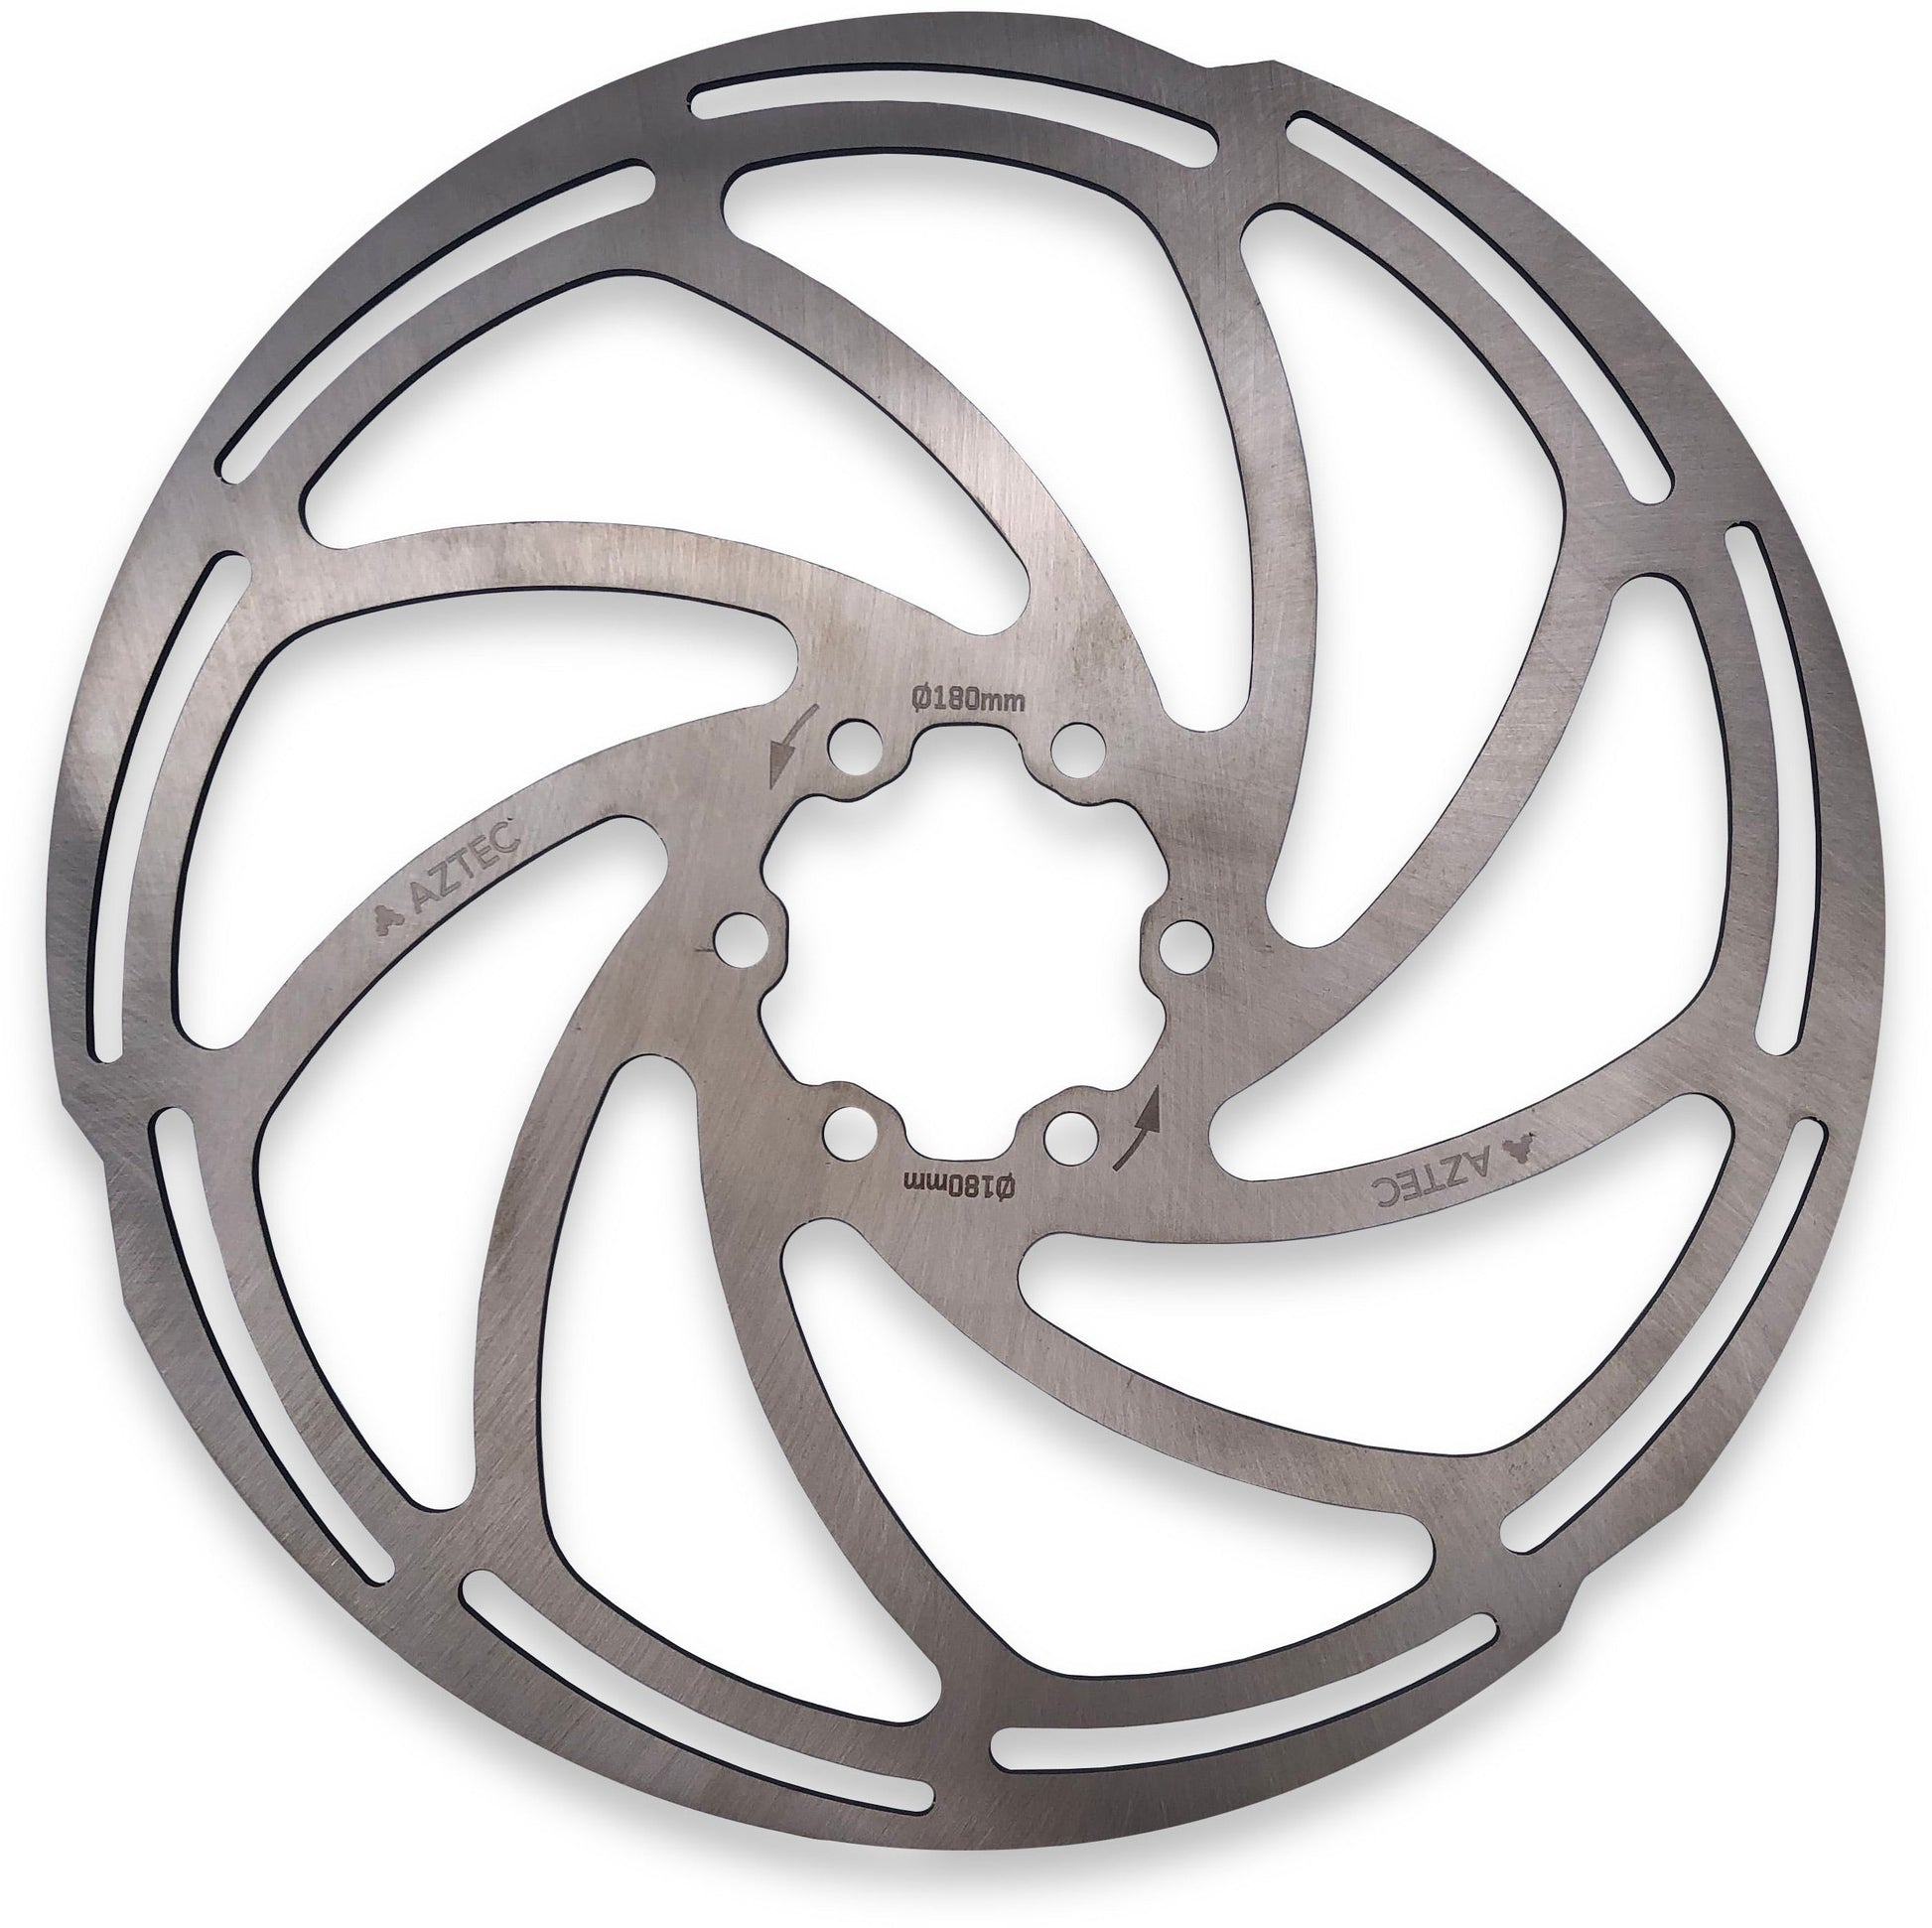 AZTEC FIXED STAINLESS STEEL 6 BOLT DISC ROTOR - 160MM